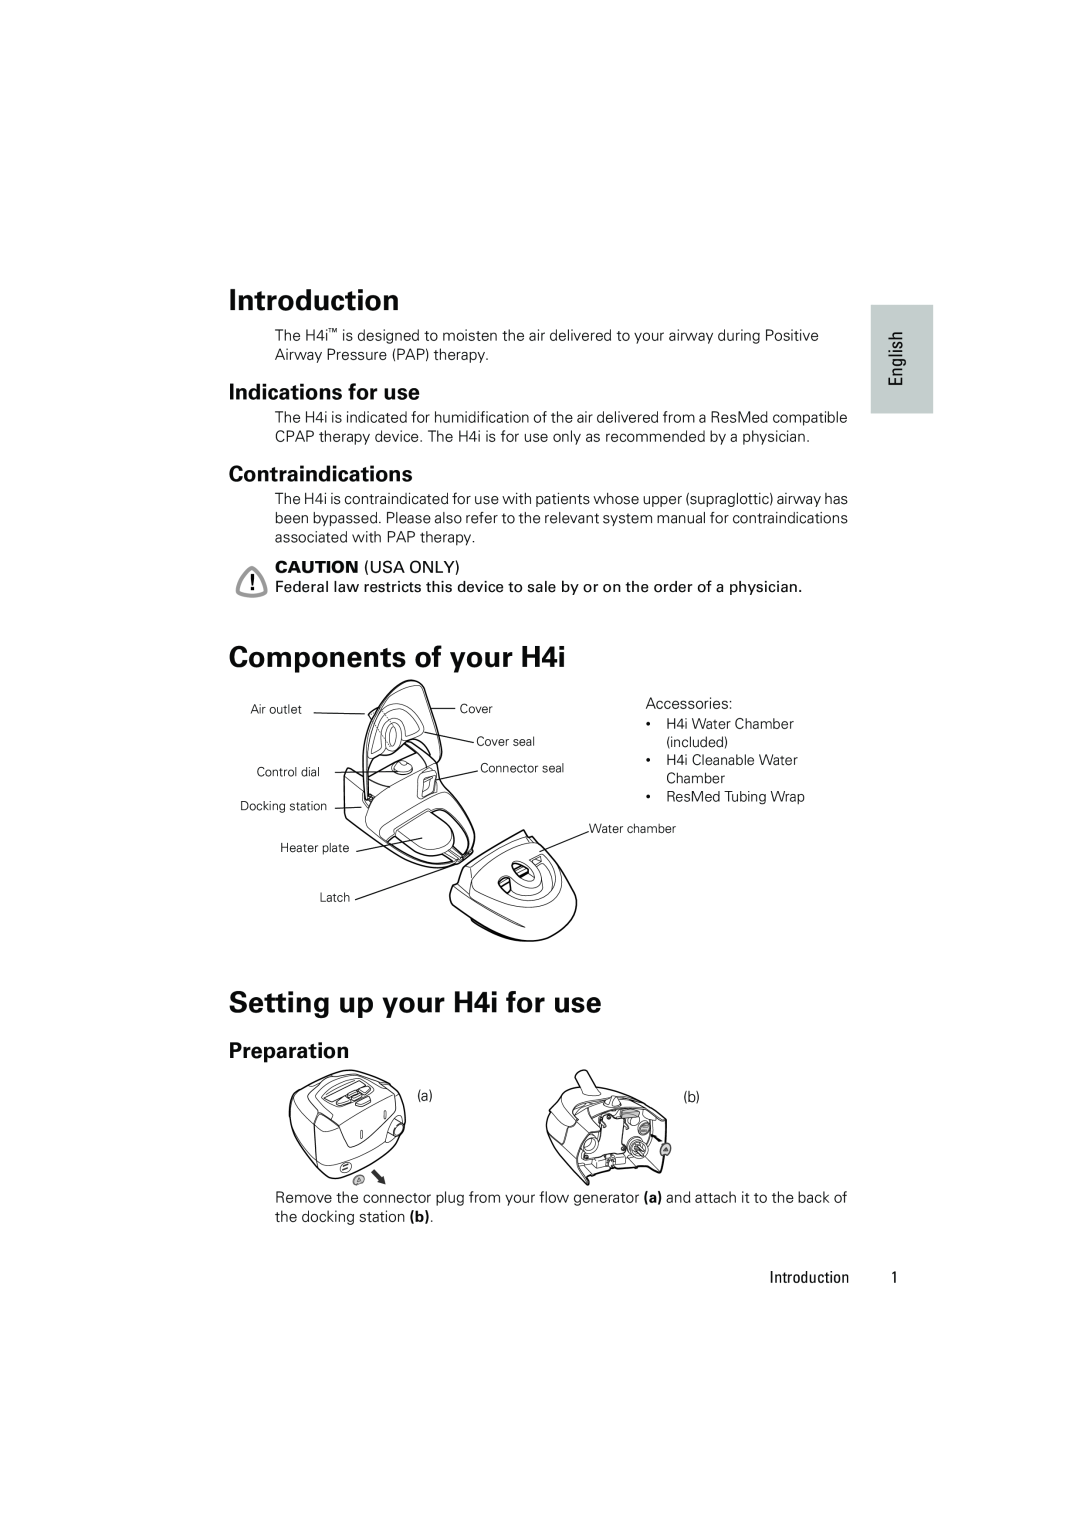 ResMed manual Introduction, Components of your H4i, Setting up your H4i for use, Indications for use, Contraindications 